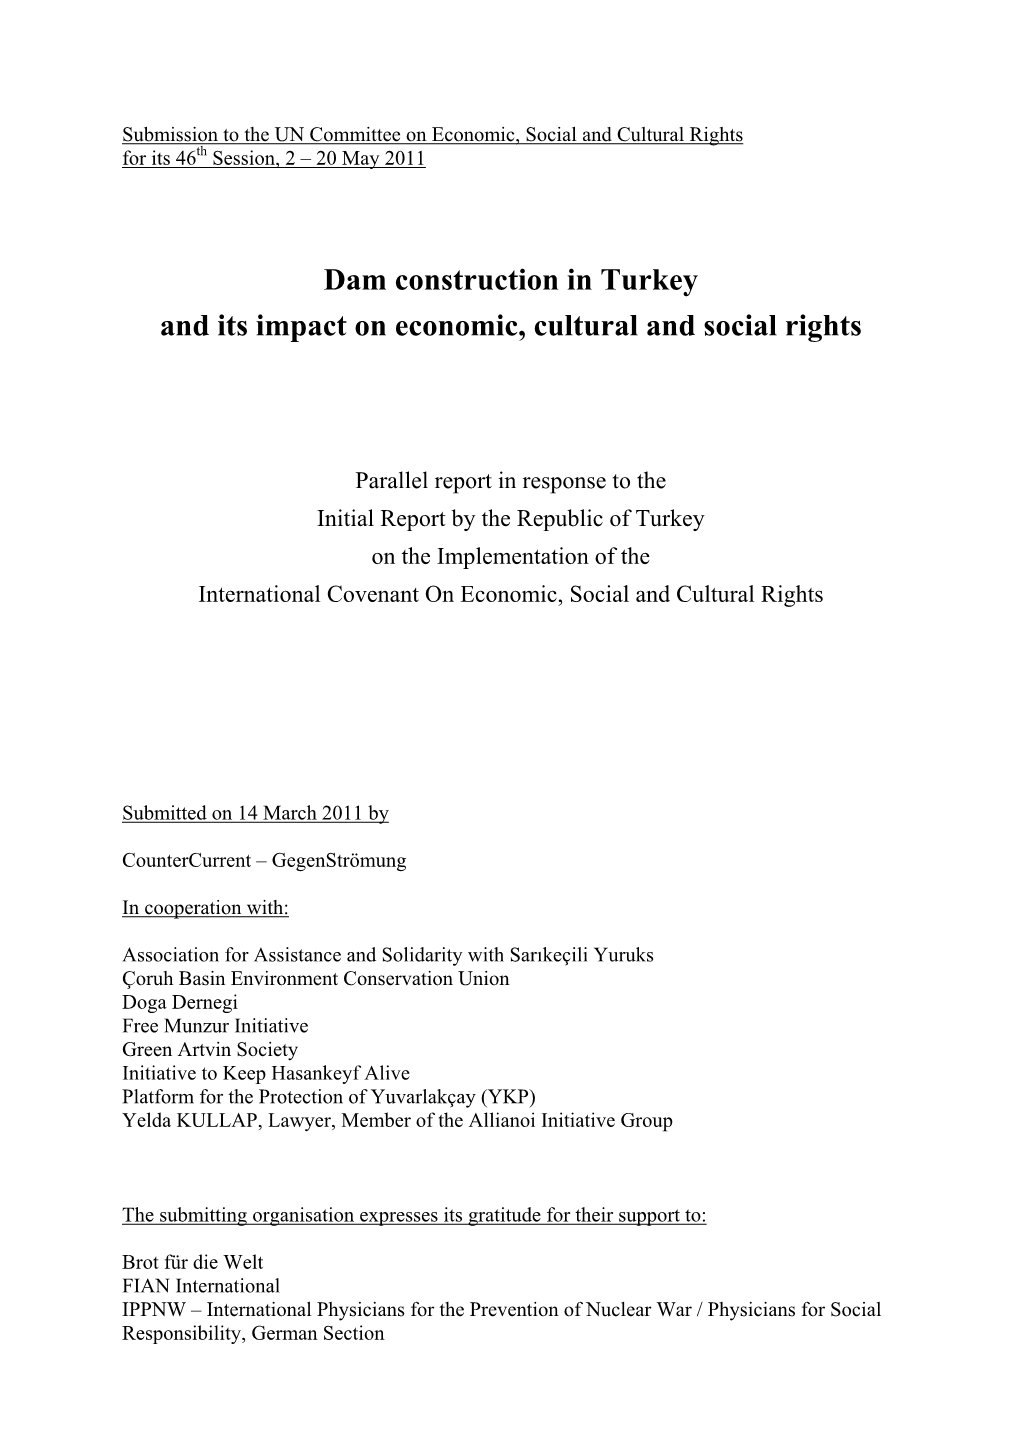 Dam Construction in Turkey and Its Impact on Economic, Cultural and Social Rights